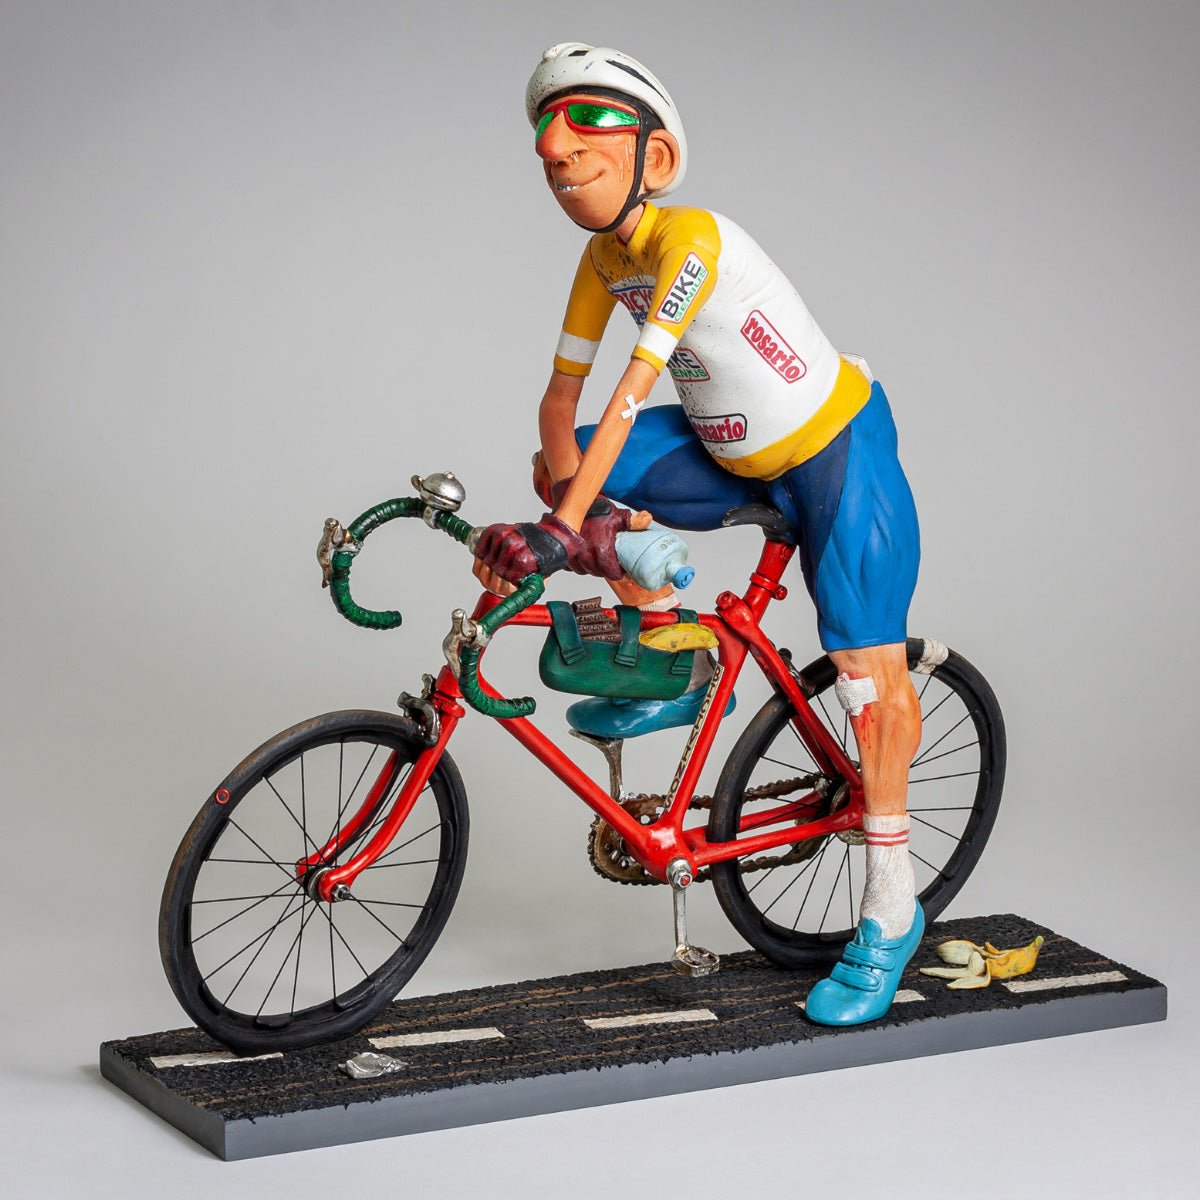 THE CYCLIST - Decor objects